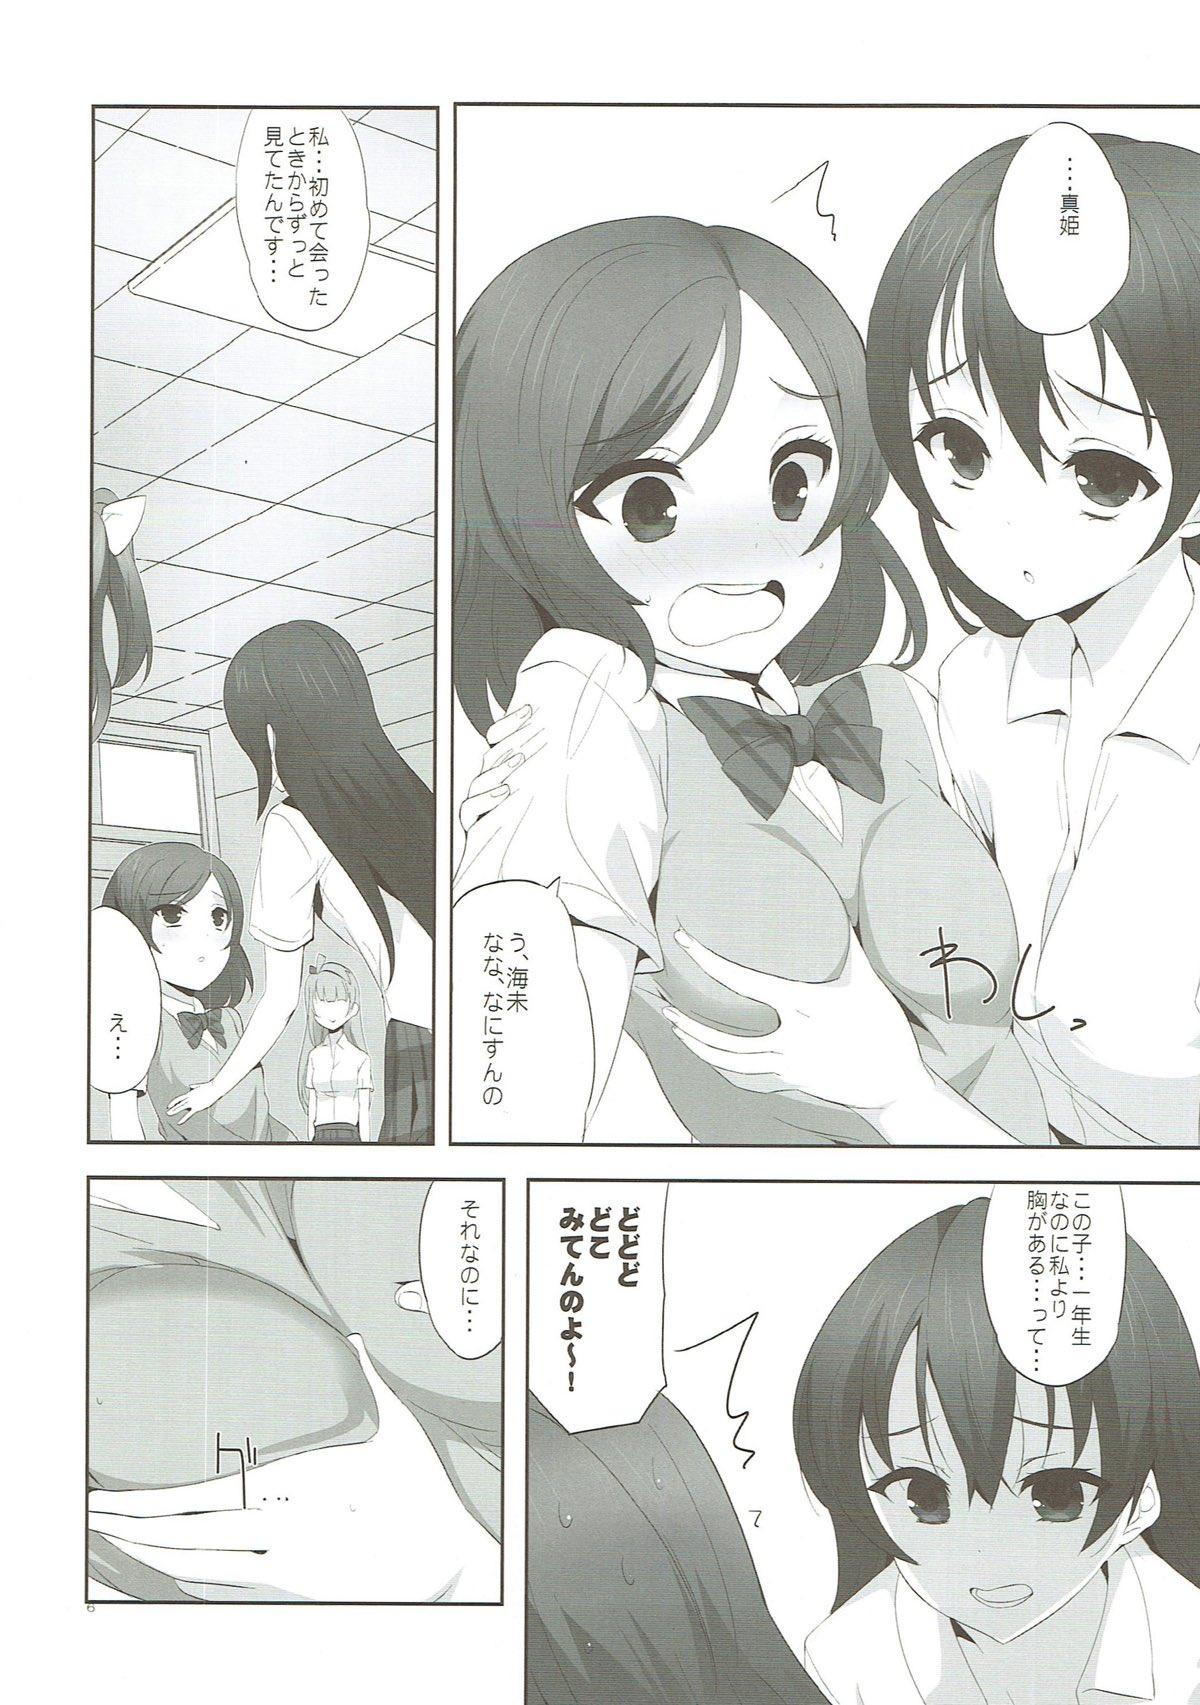 Transexual fagrance 2 - Love live Shot - Page 5